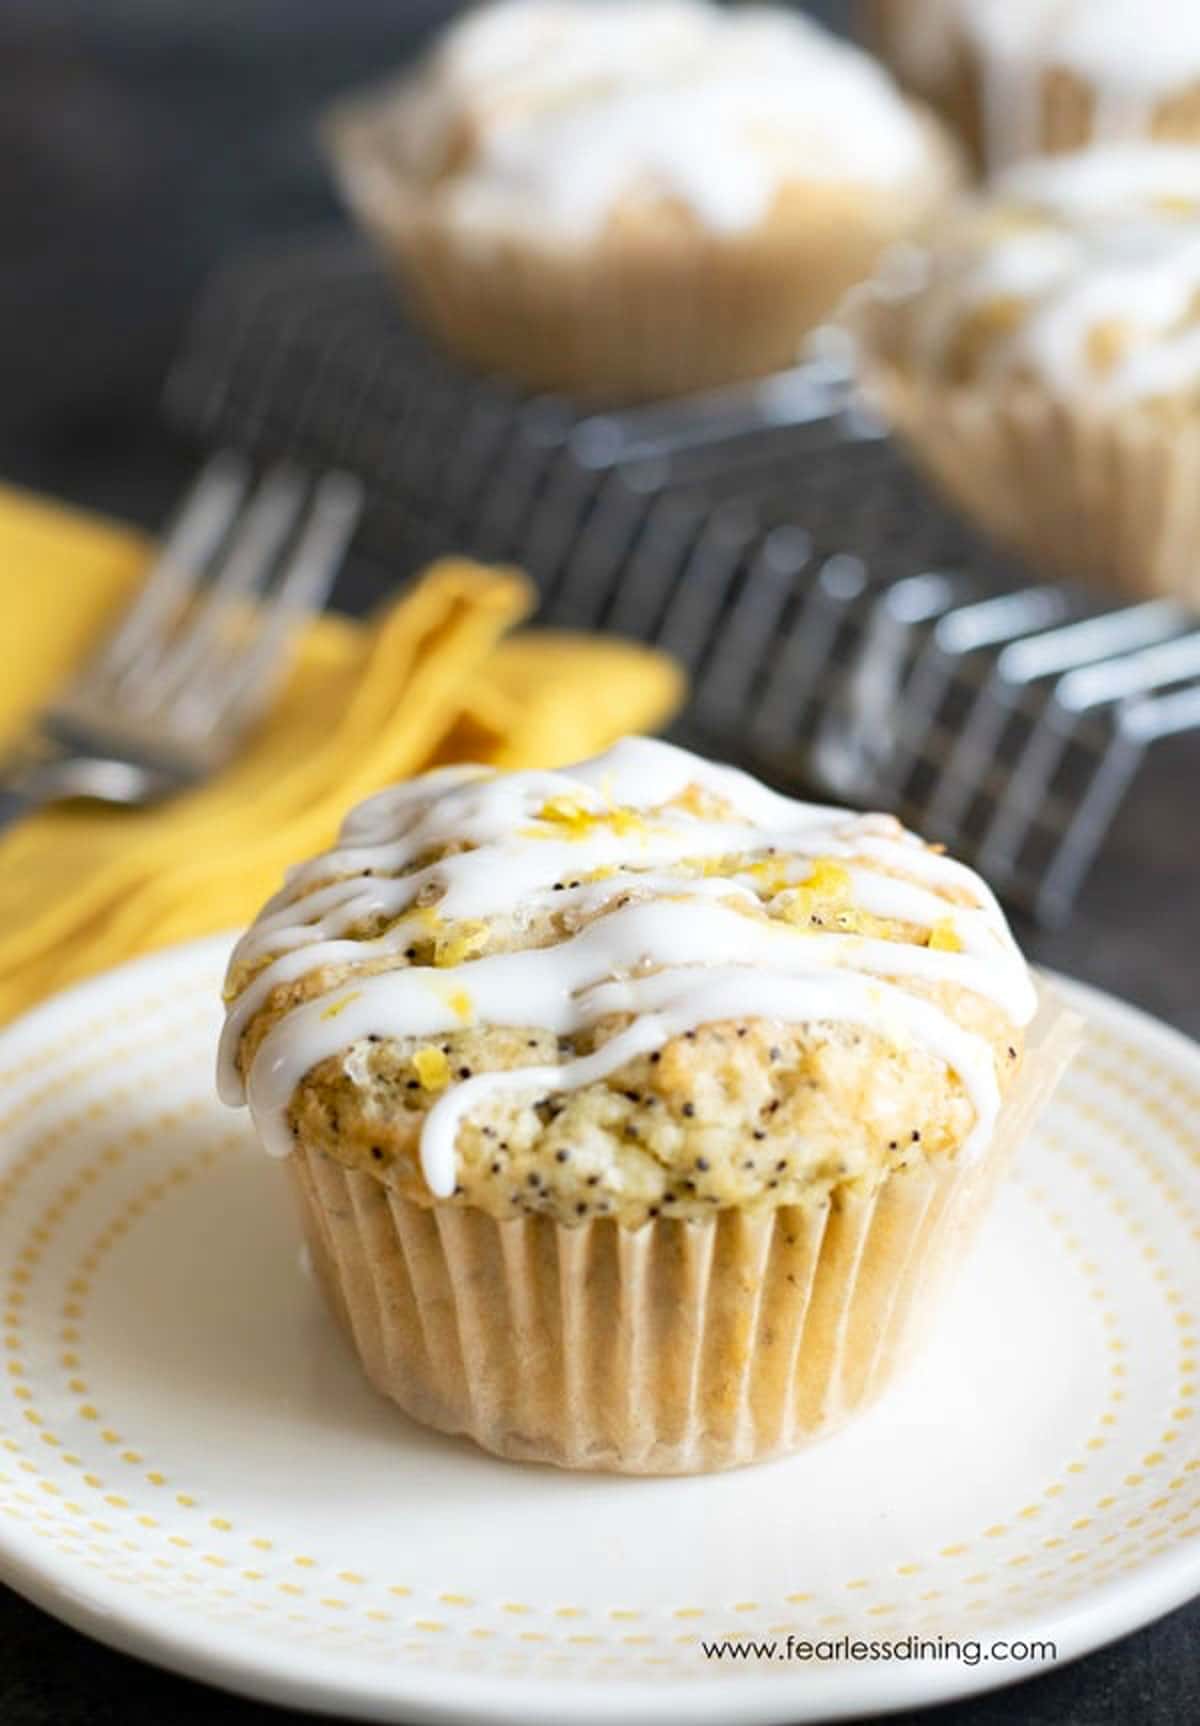 A lemon poppy seed muffin on a plate.